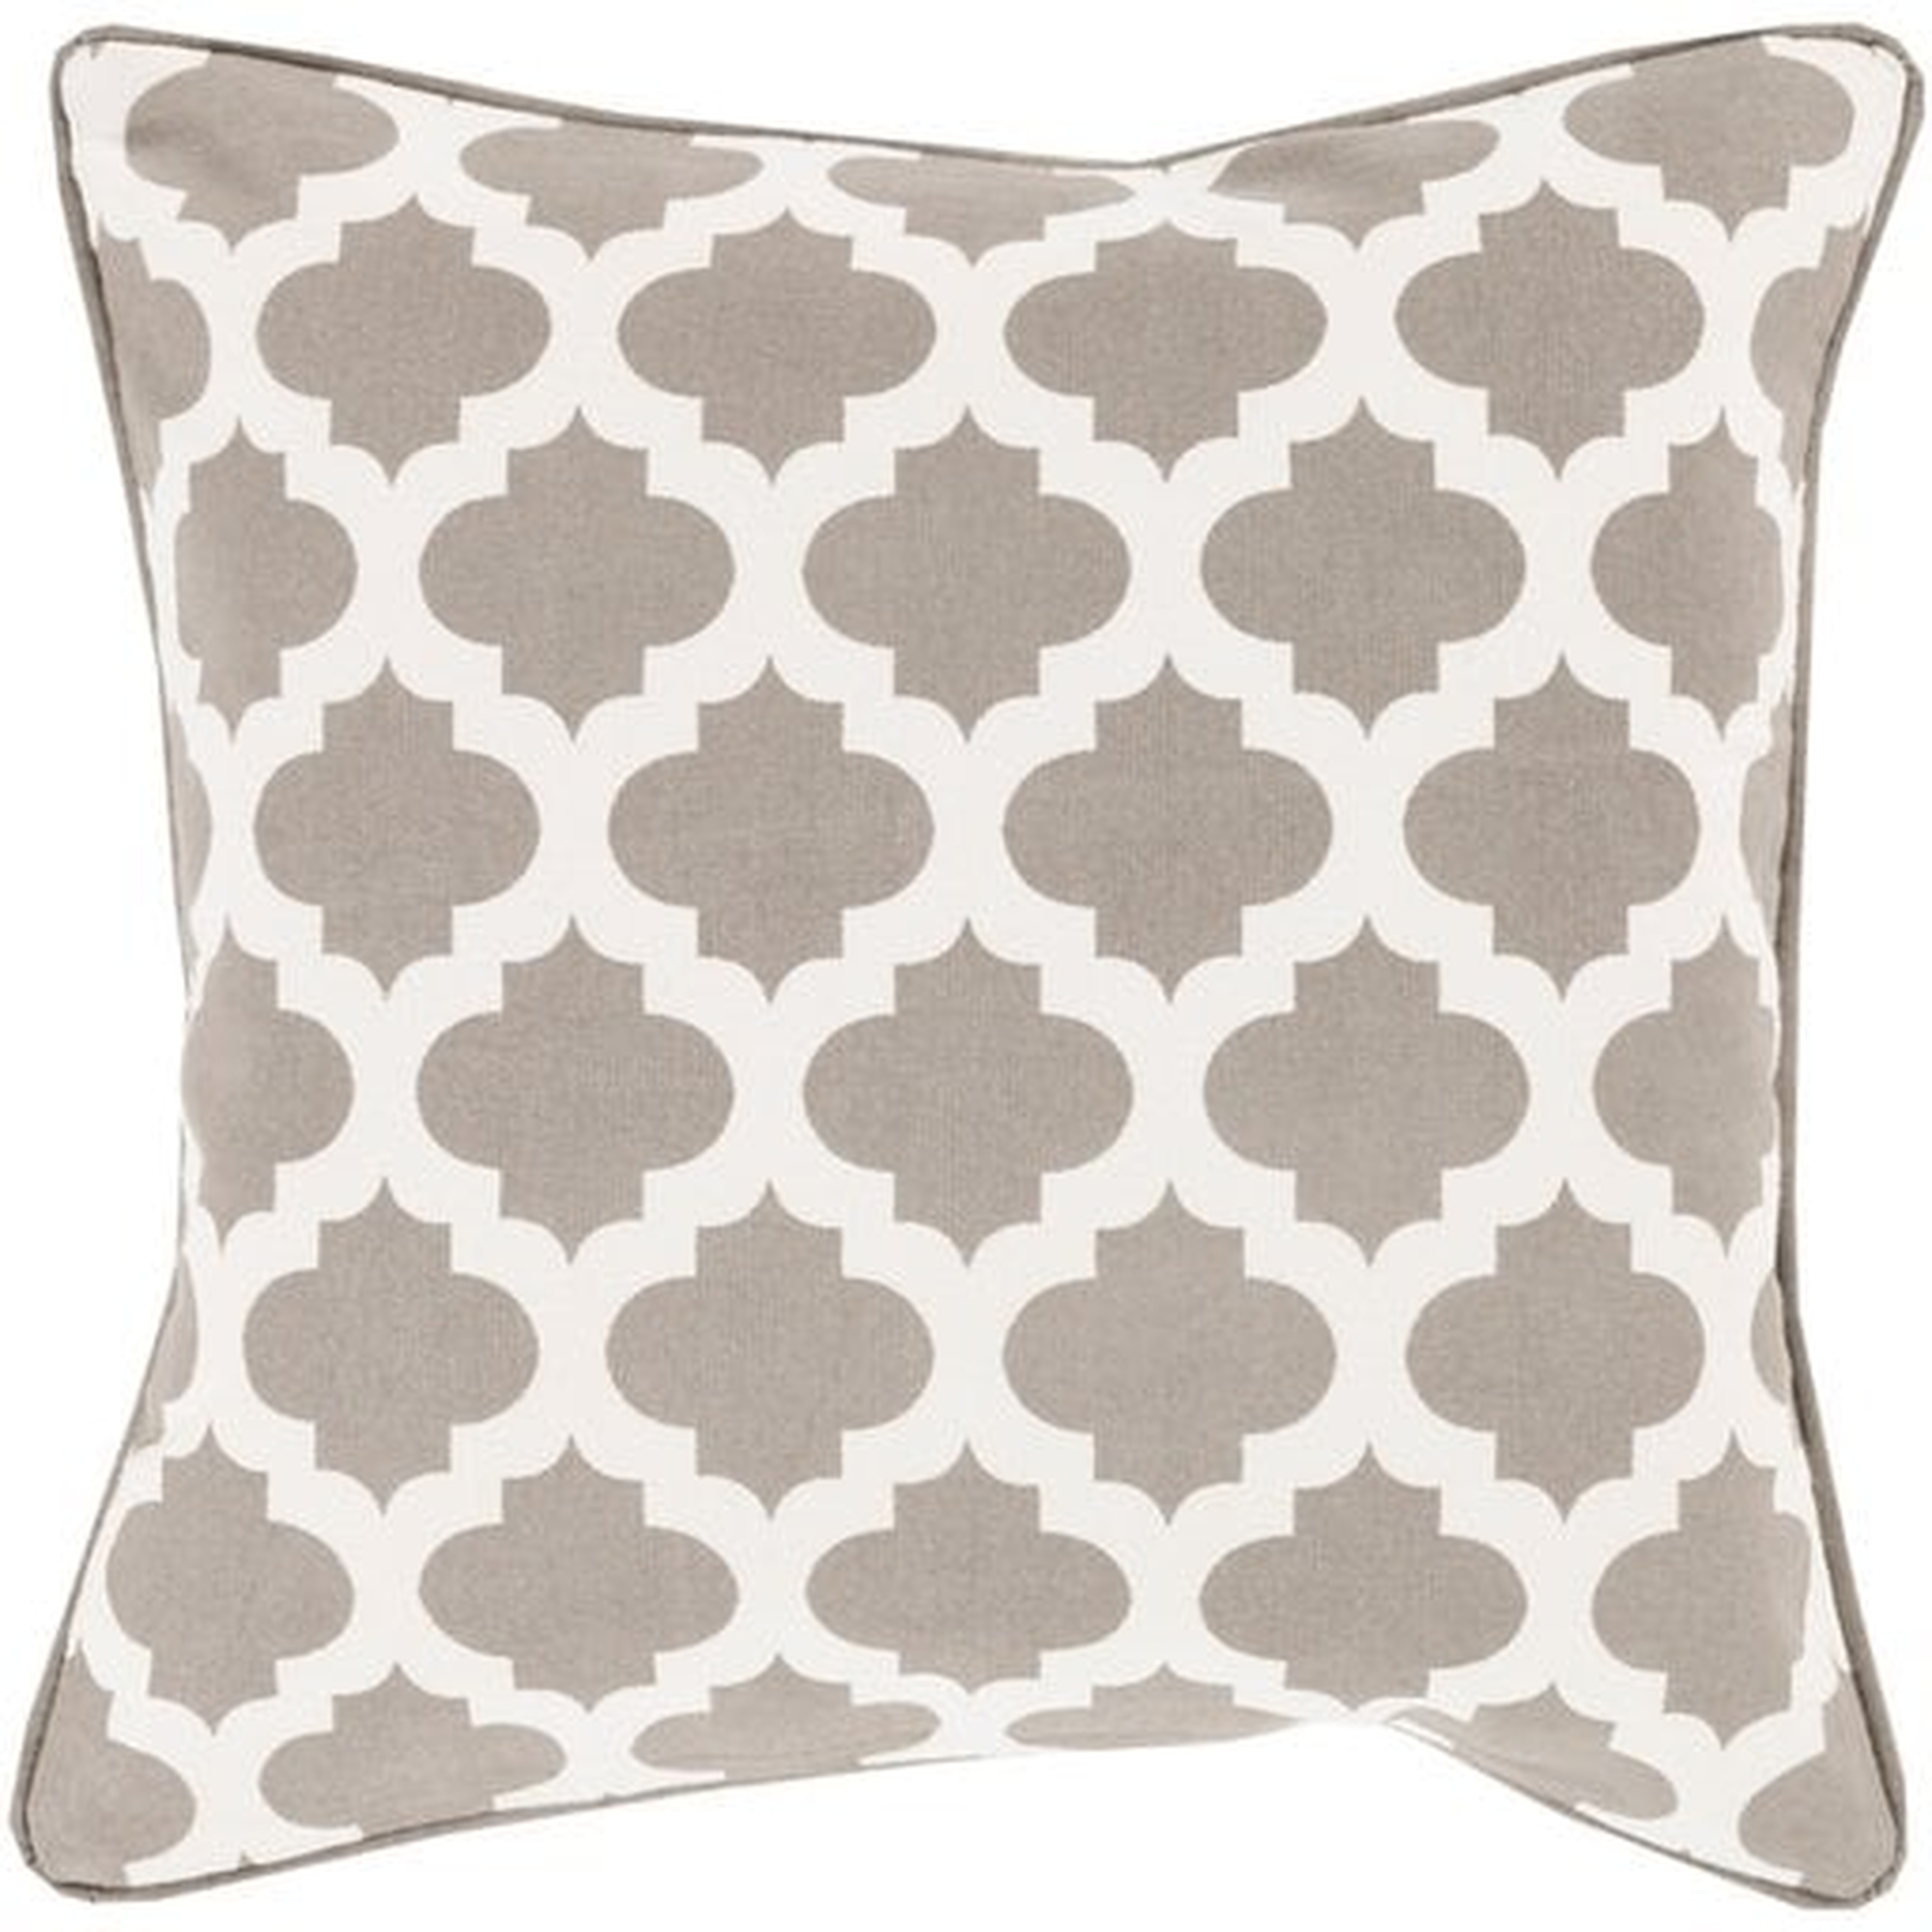 Moroccan Printed Lattice 20x20 Pillow Cover with Down Insert - Surya